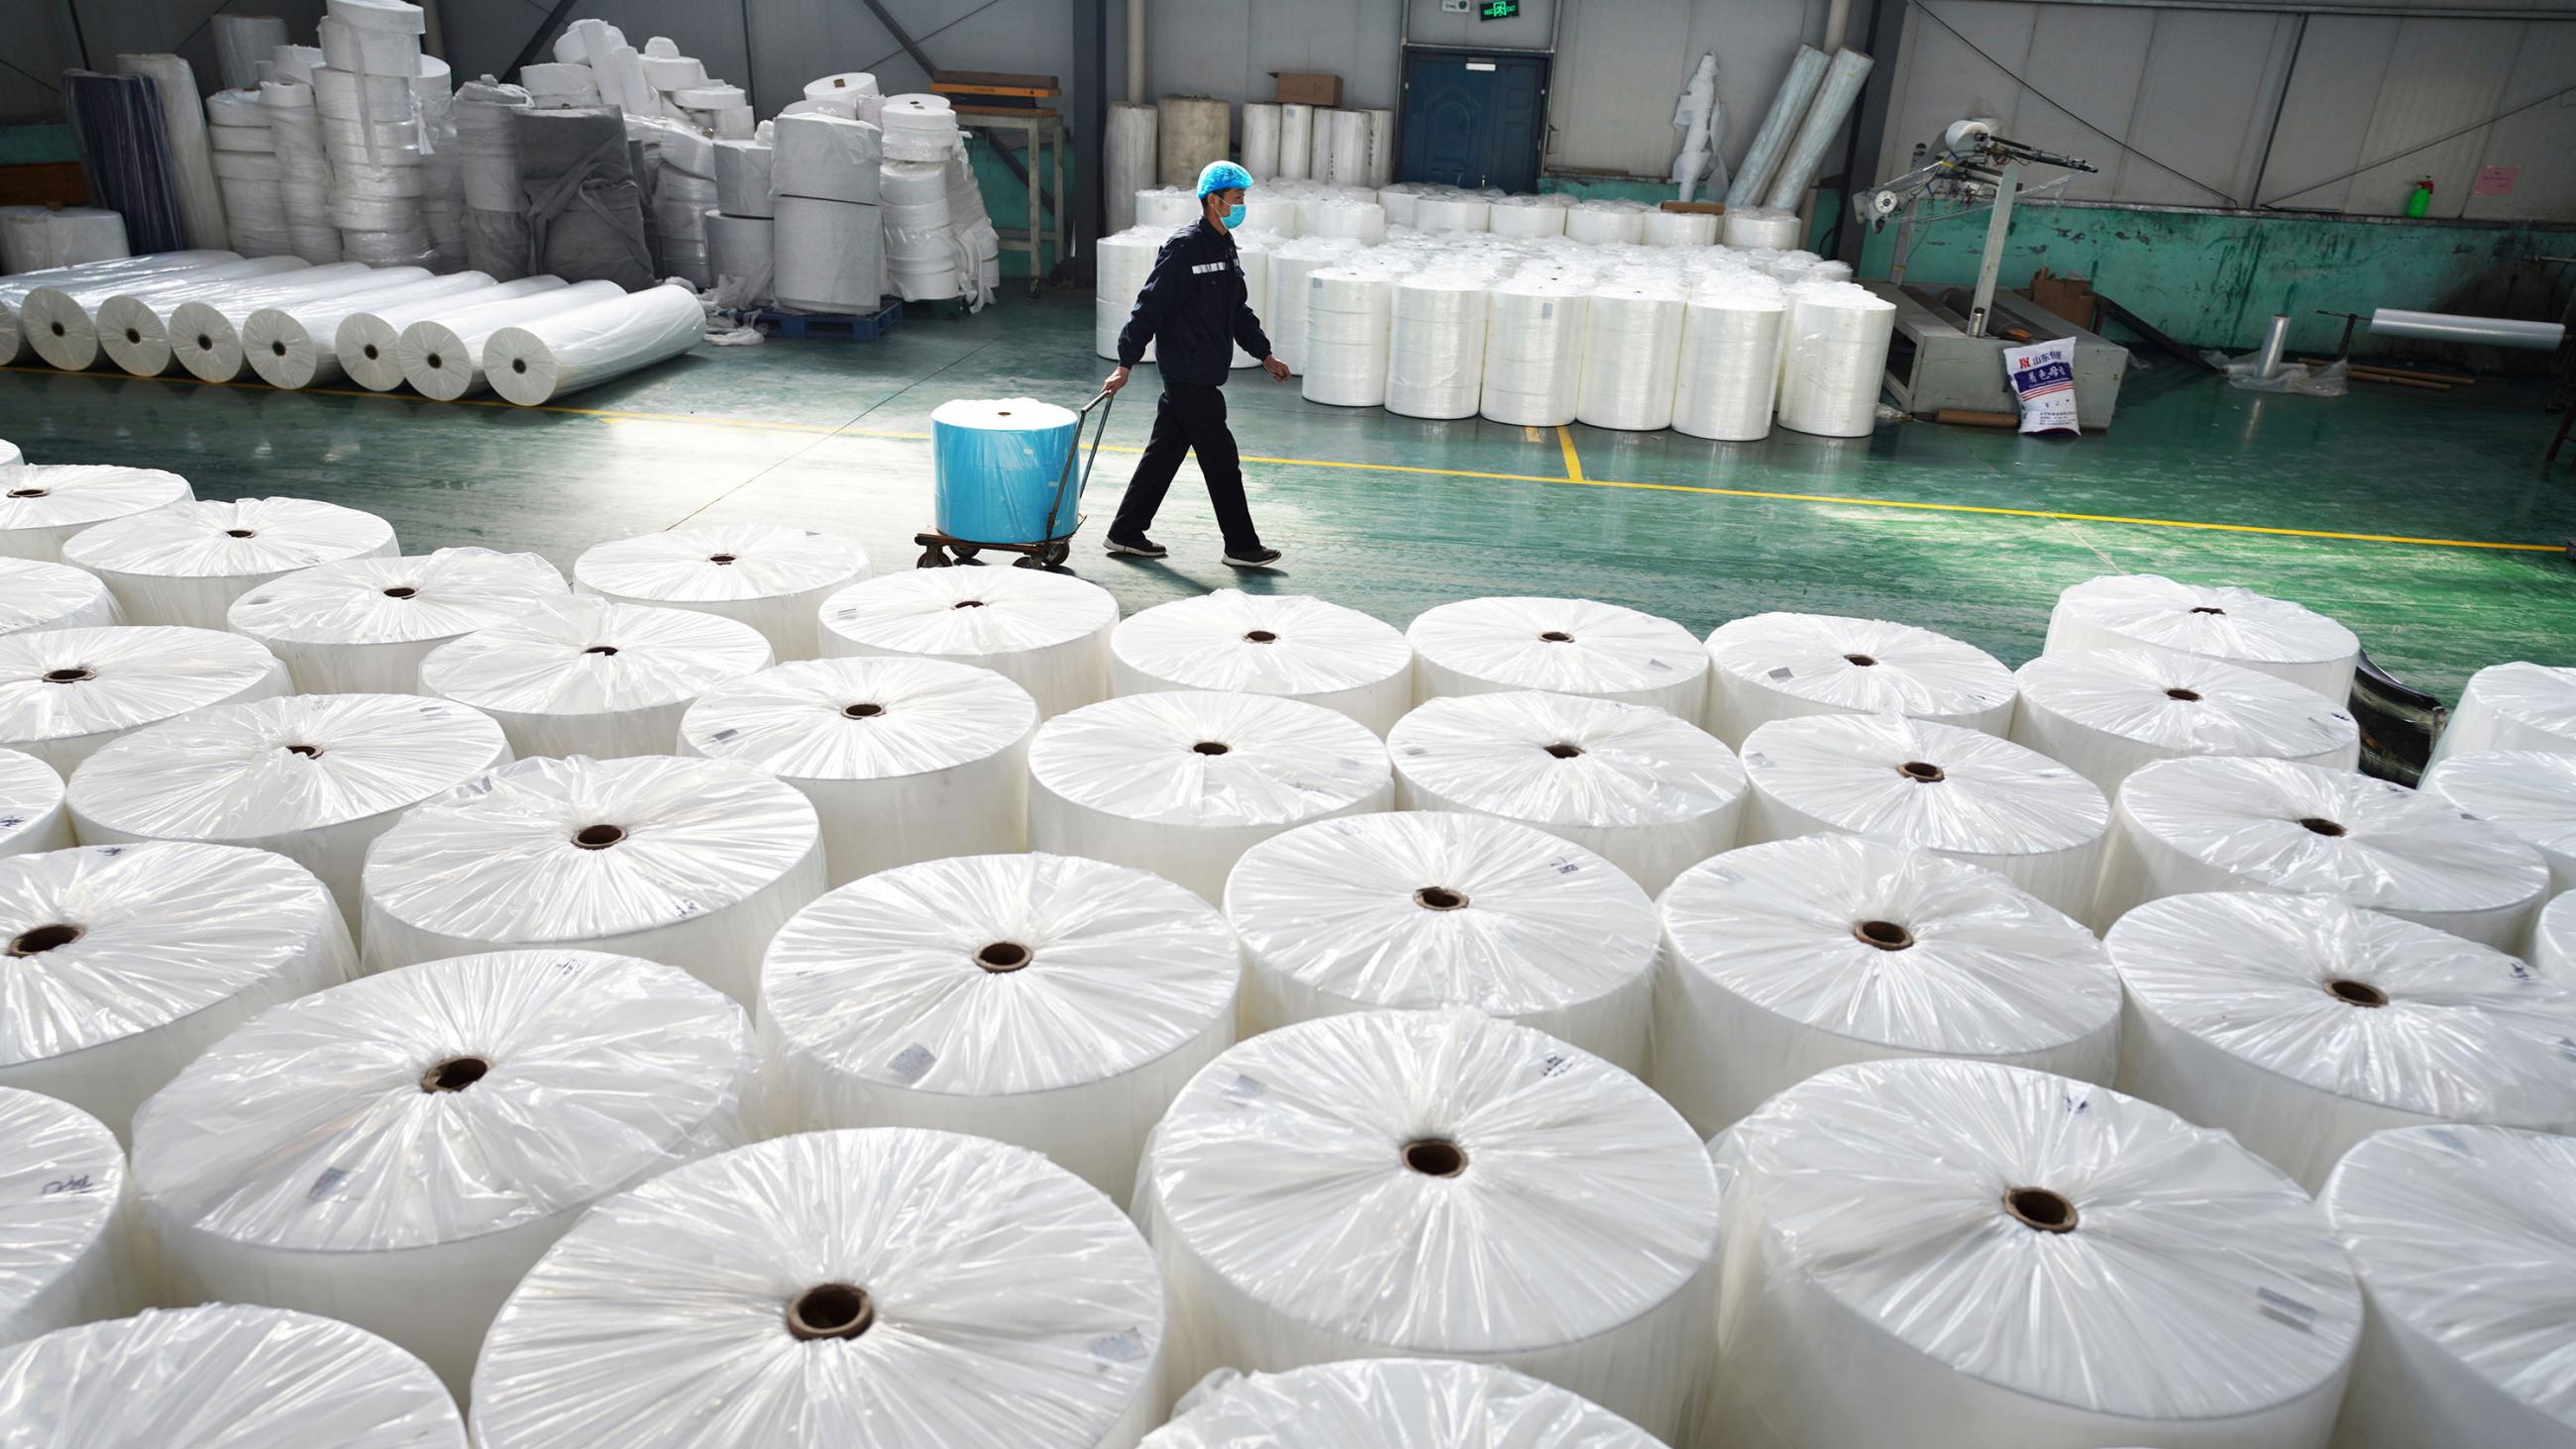 Picture shows a large factory space with a massive stack of large fabric spools in the foreground and a single worker walking by in the background. 